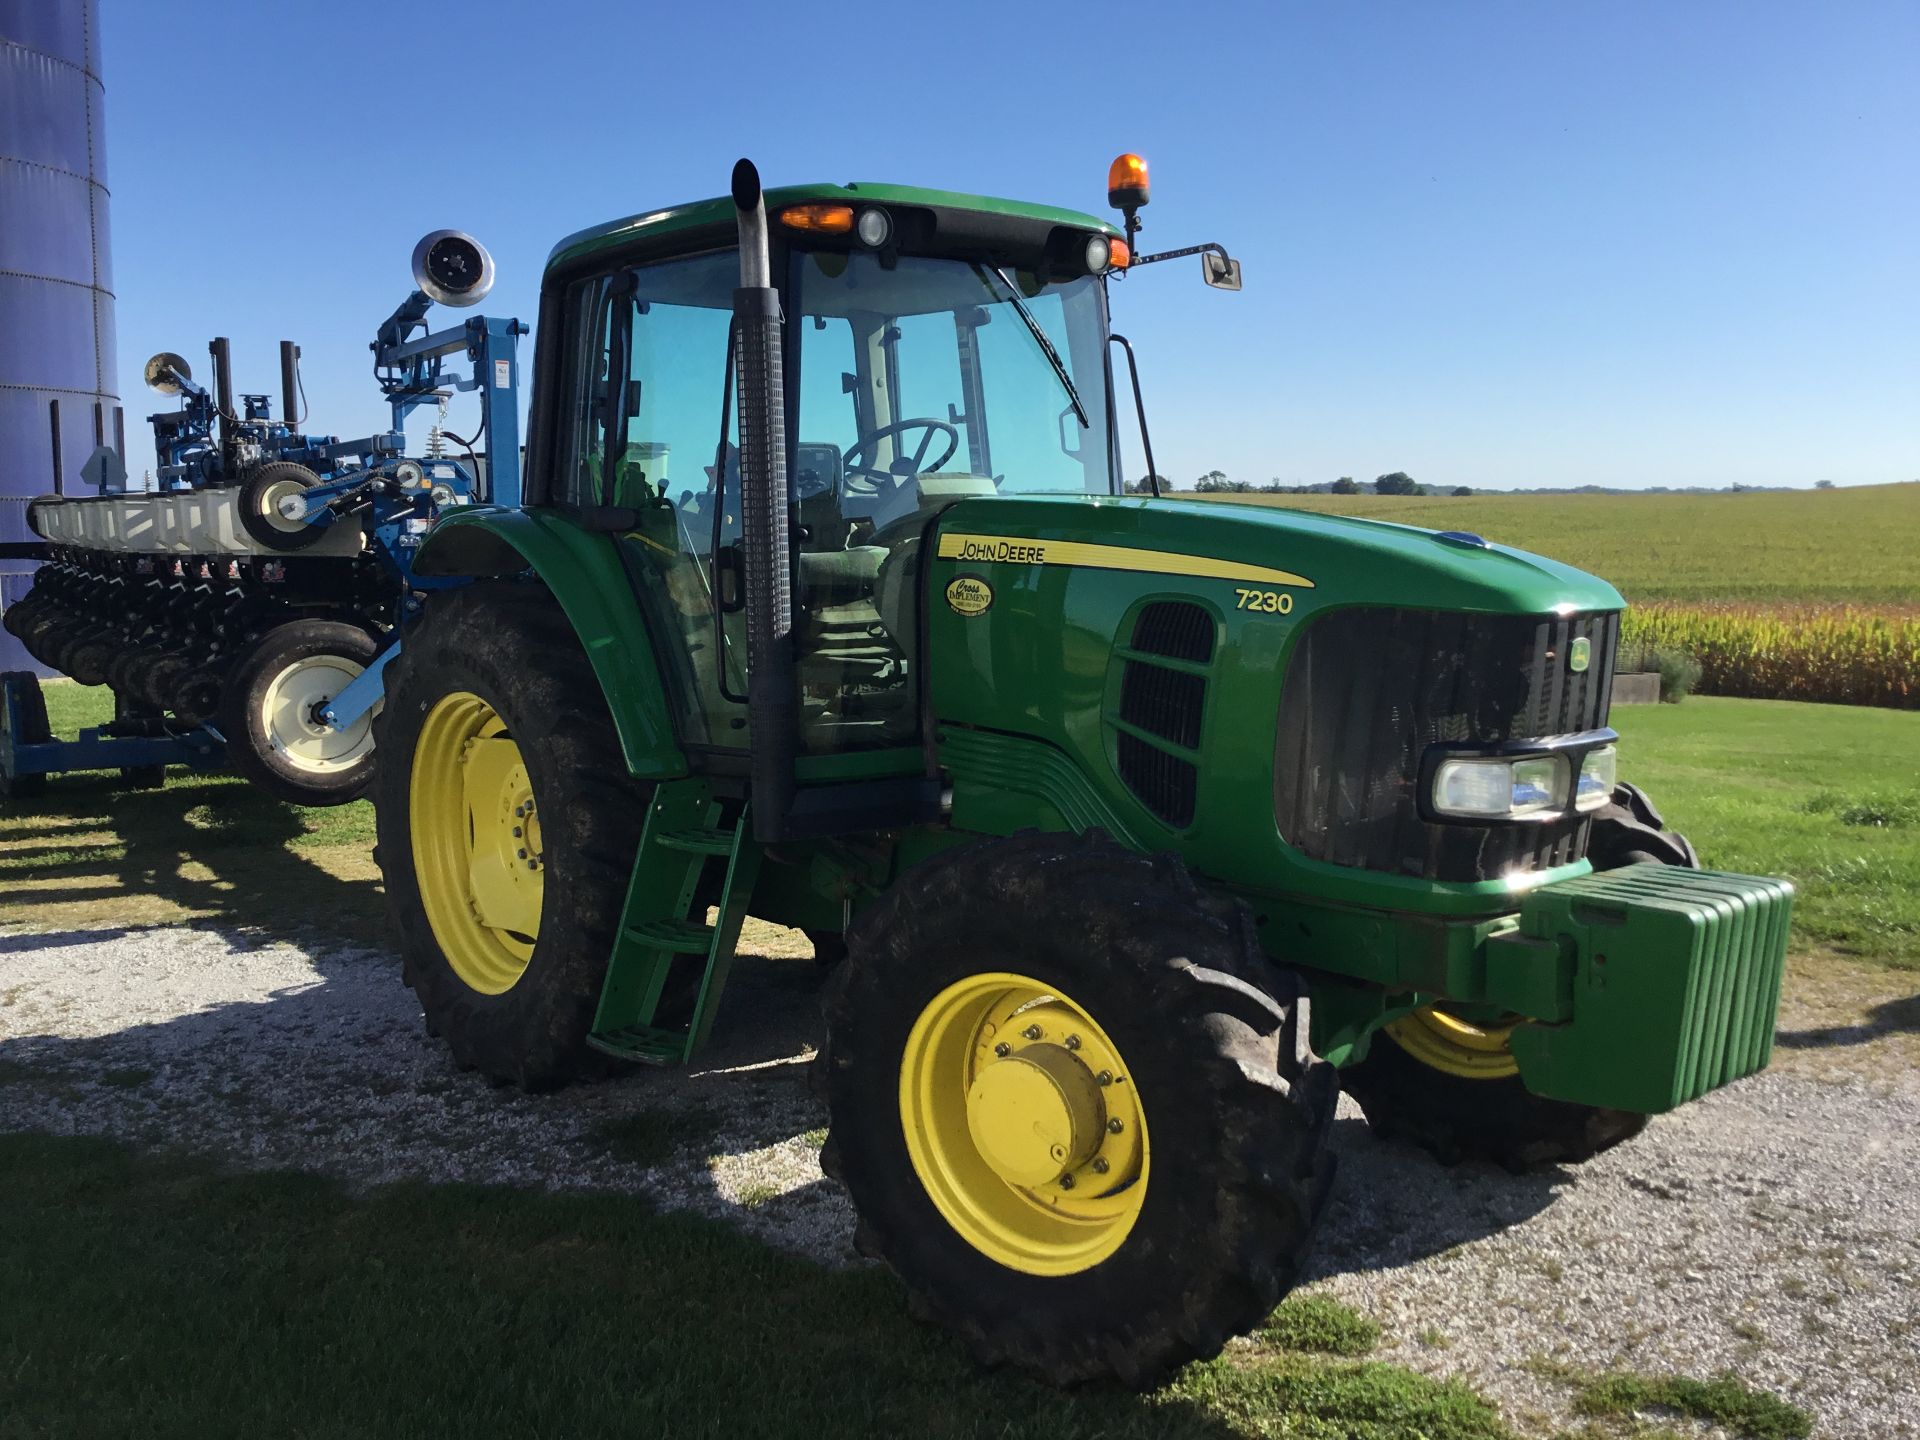 2009 JD 7230 MFWD, 24 Speed Trans, 3 Hyd. Remotes, 1000 PTO, 8 Front Wts., 460/85R38 Rear Tires, - Image 10 of 16